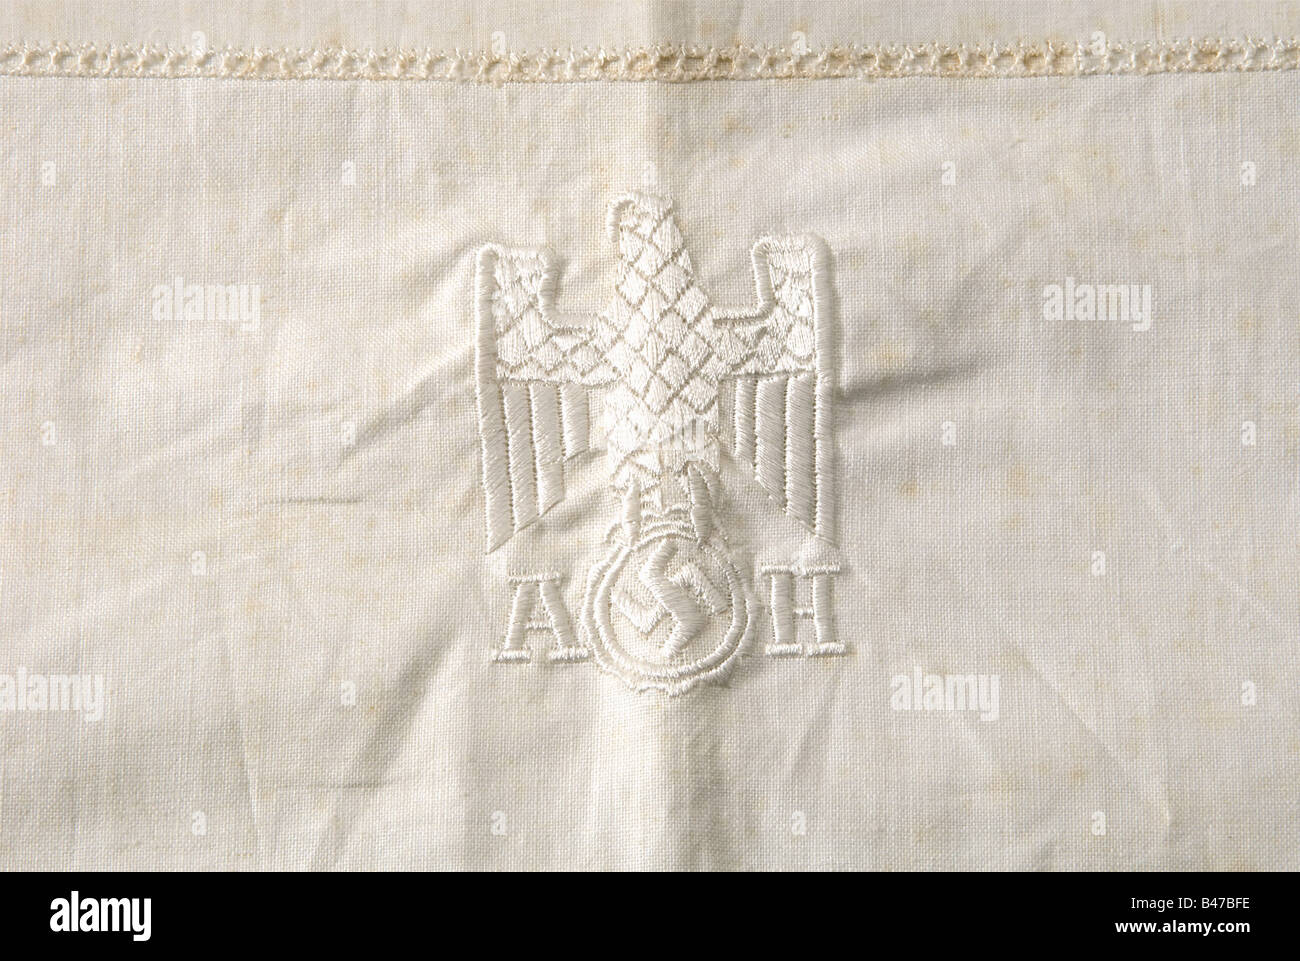 Adolf Hitler, his personal bedclothes Pillow case and duvet cover of light white linen with restrained, silk embroidered, floral decoration and geometric trim on the pillow. The party eagle is embroidered in white silk in the centre of each, flanked by the initials 'A' and 'H'. Ca. 75 x 75 and 120 x 175 cm respectively. Undamaged, (mould-)stained in places. historic, historical, 1930s, 1930s, 20th century, NS, National Socialism, Nazism, Third Reich, German Reich, Germany, German, National Socialist, Nazi, Nazi period, fascism, fine arts, art, art object, art o, Stock Photo